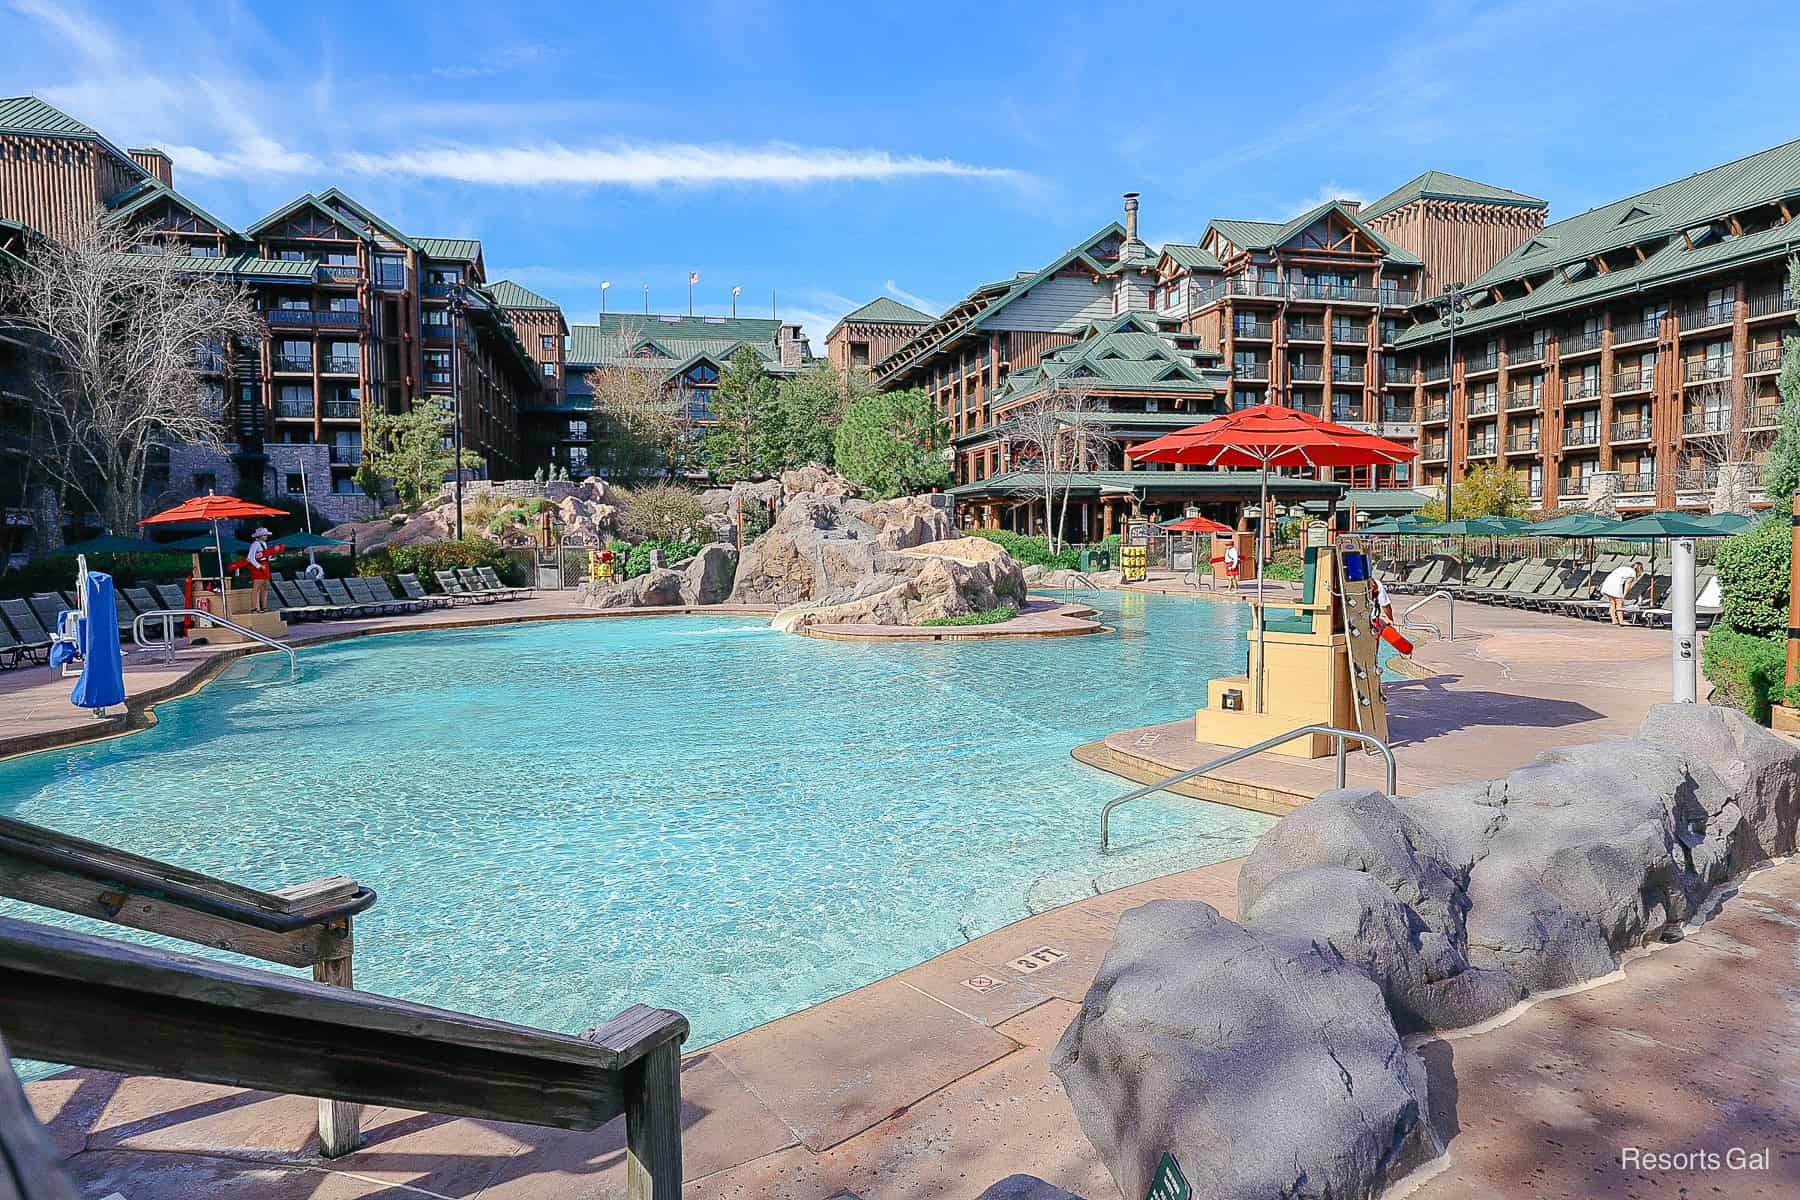 Wilderness Lodge Resort with the pool 